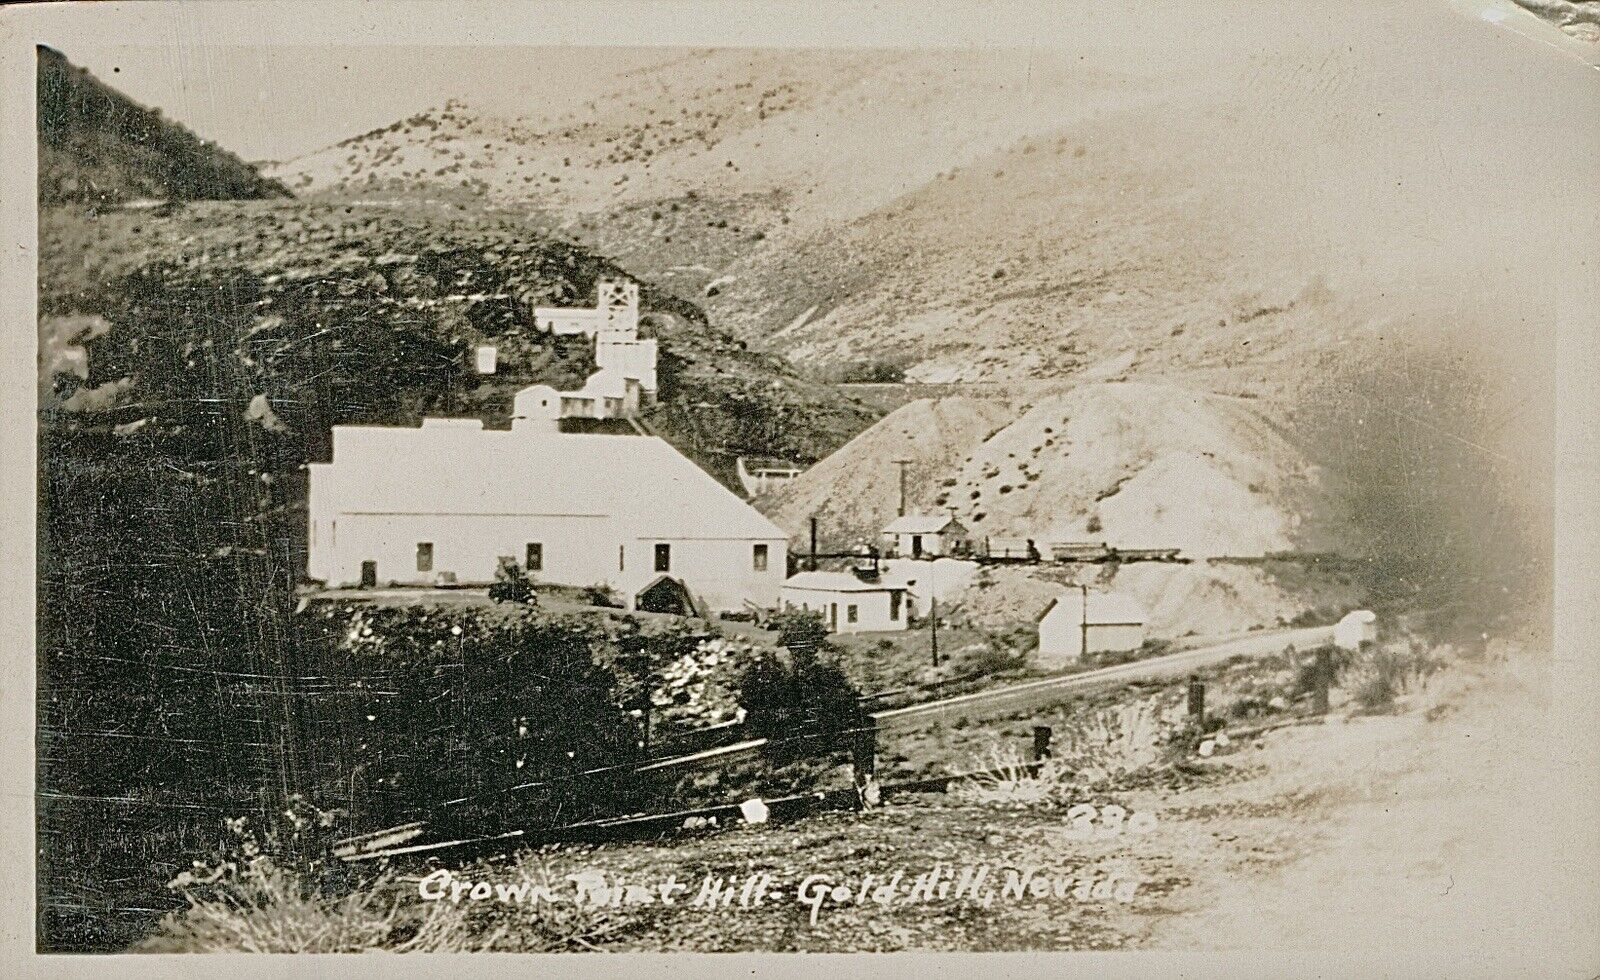 Postcard c1907 RPPC Antique CROWN POINT HILL, GOLD HILL, NEVADA Mining Facility